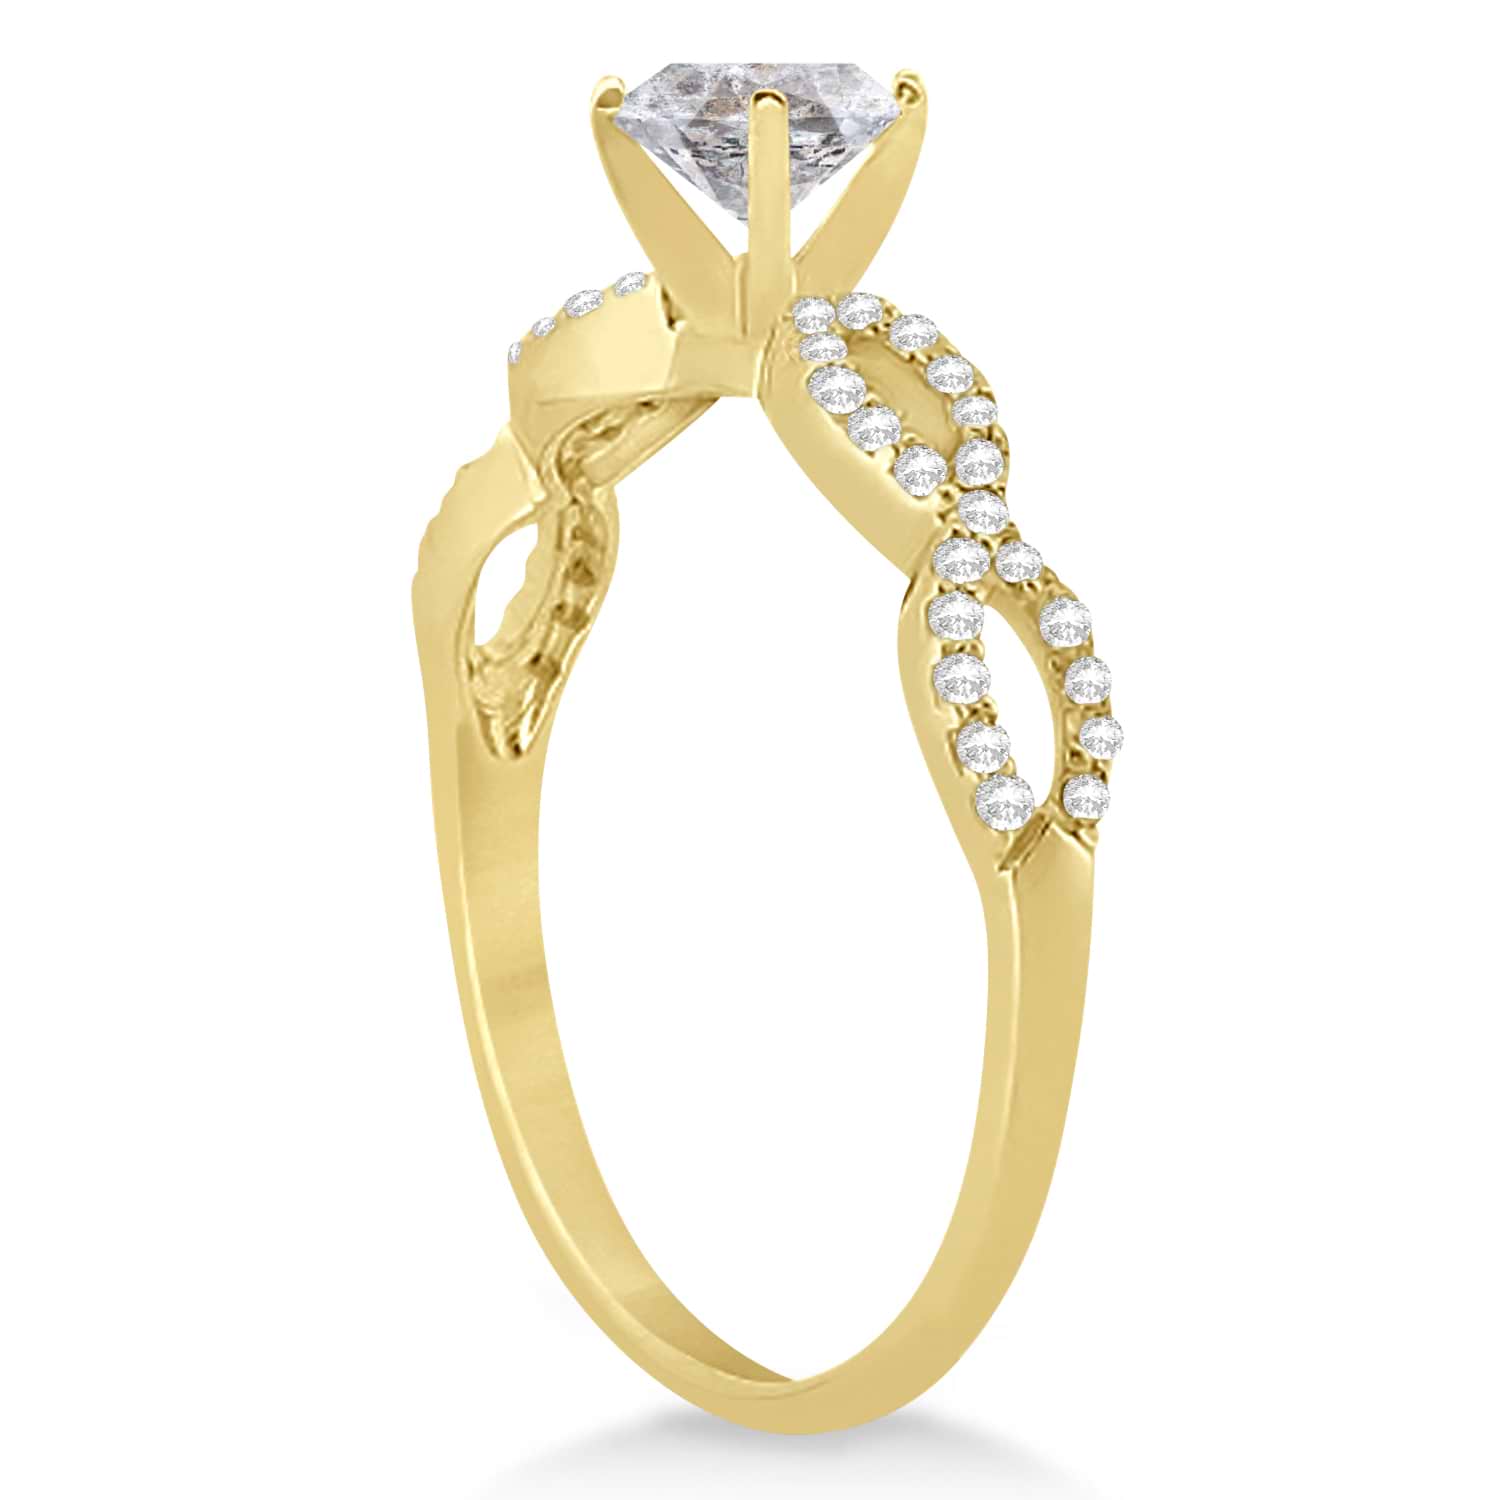 Twisted Infinity Round Salt & Pepper Diamond Engagement Ring 14k Yellow Gold (0.50ct)